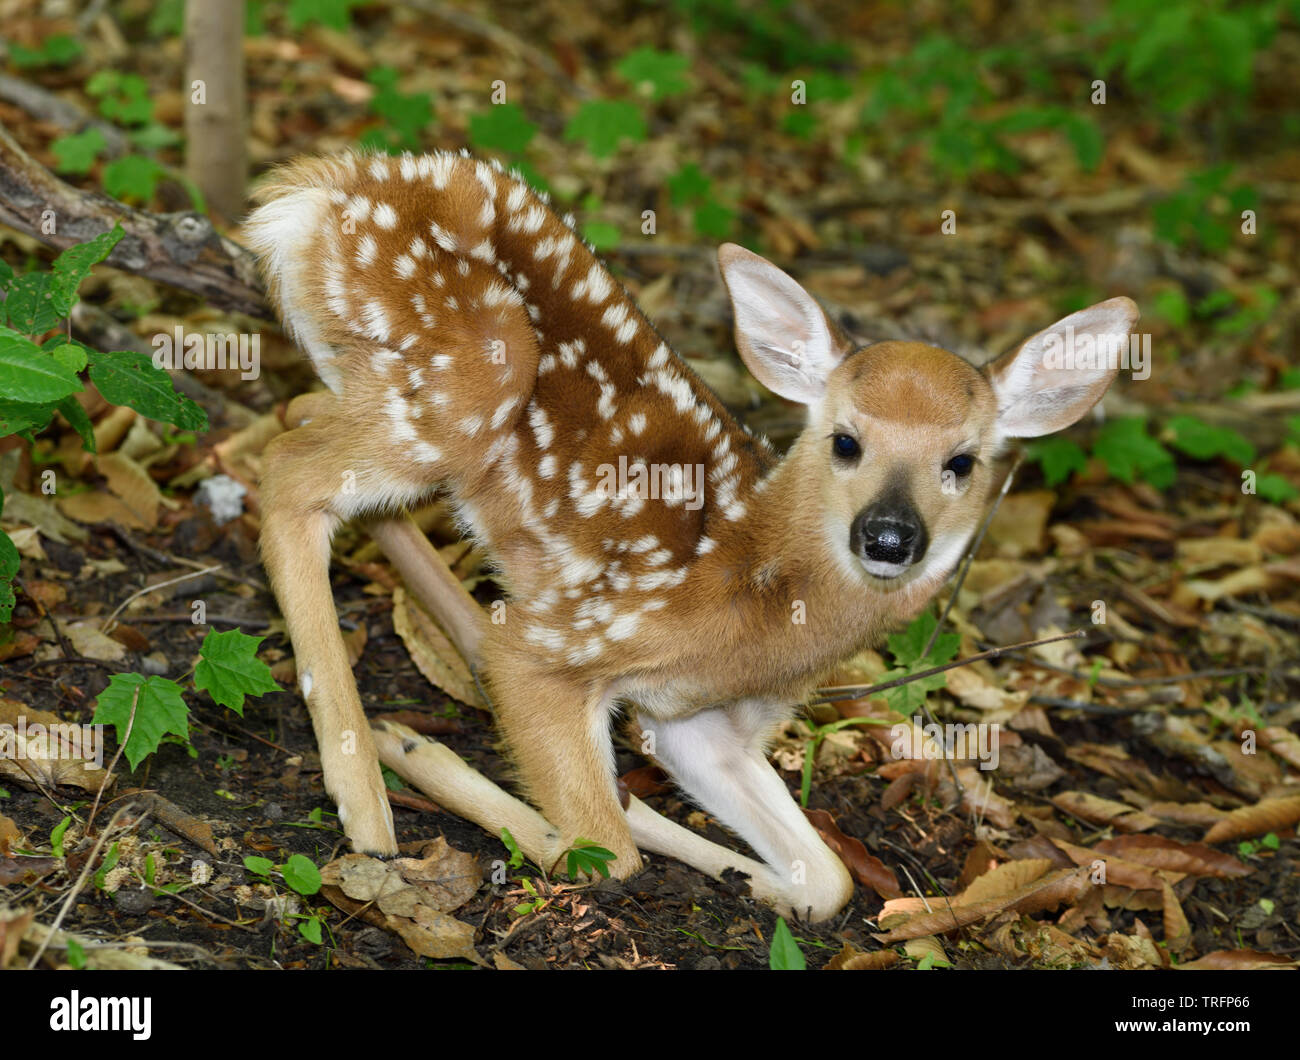 Day old tiny white tailed deer fawn with spots getting up on spindly legs in a forest Toronto Stock Photo